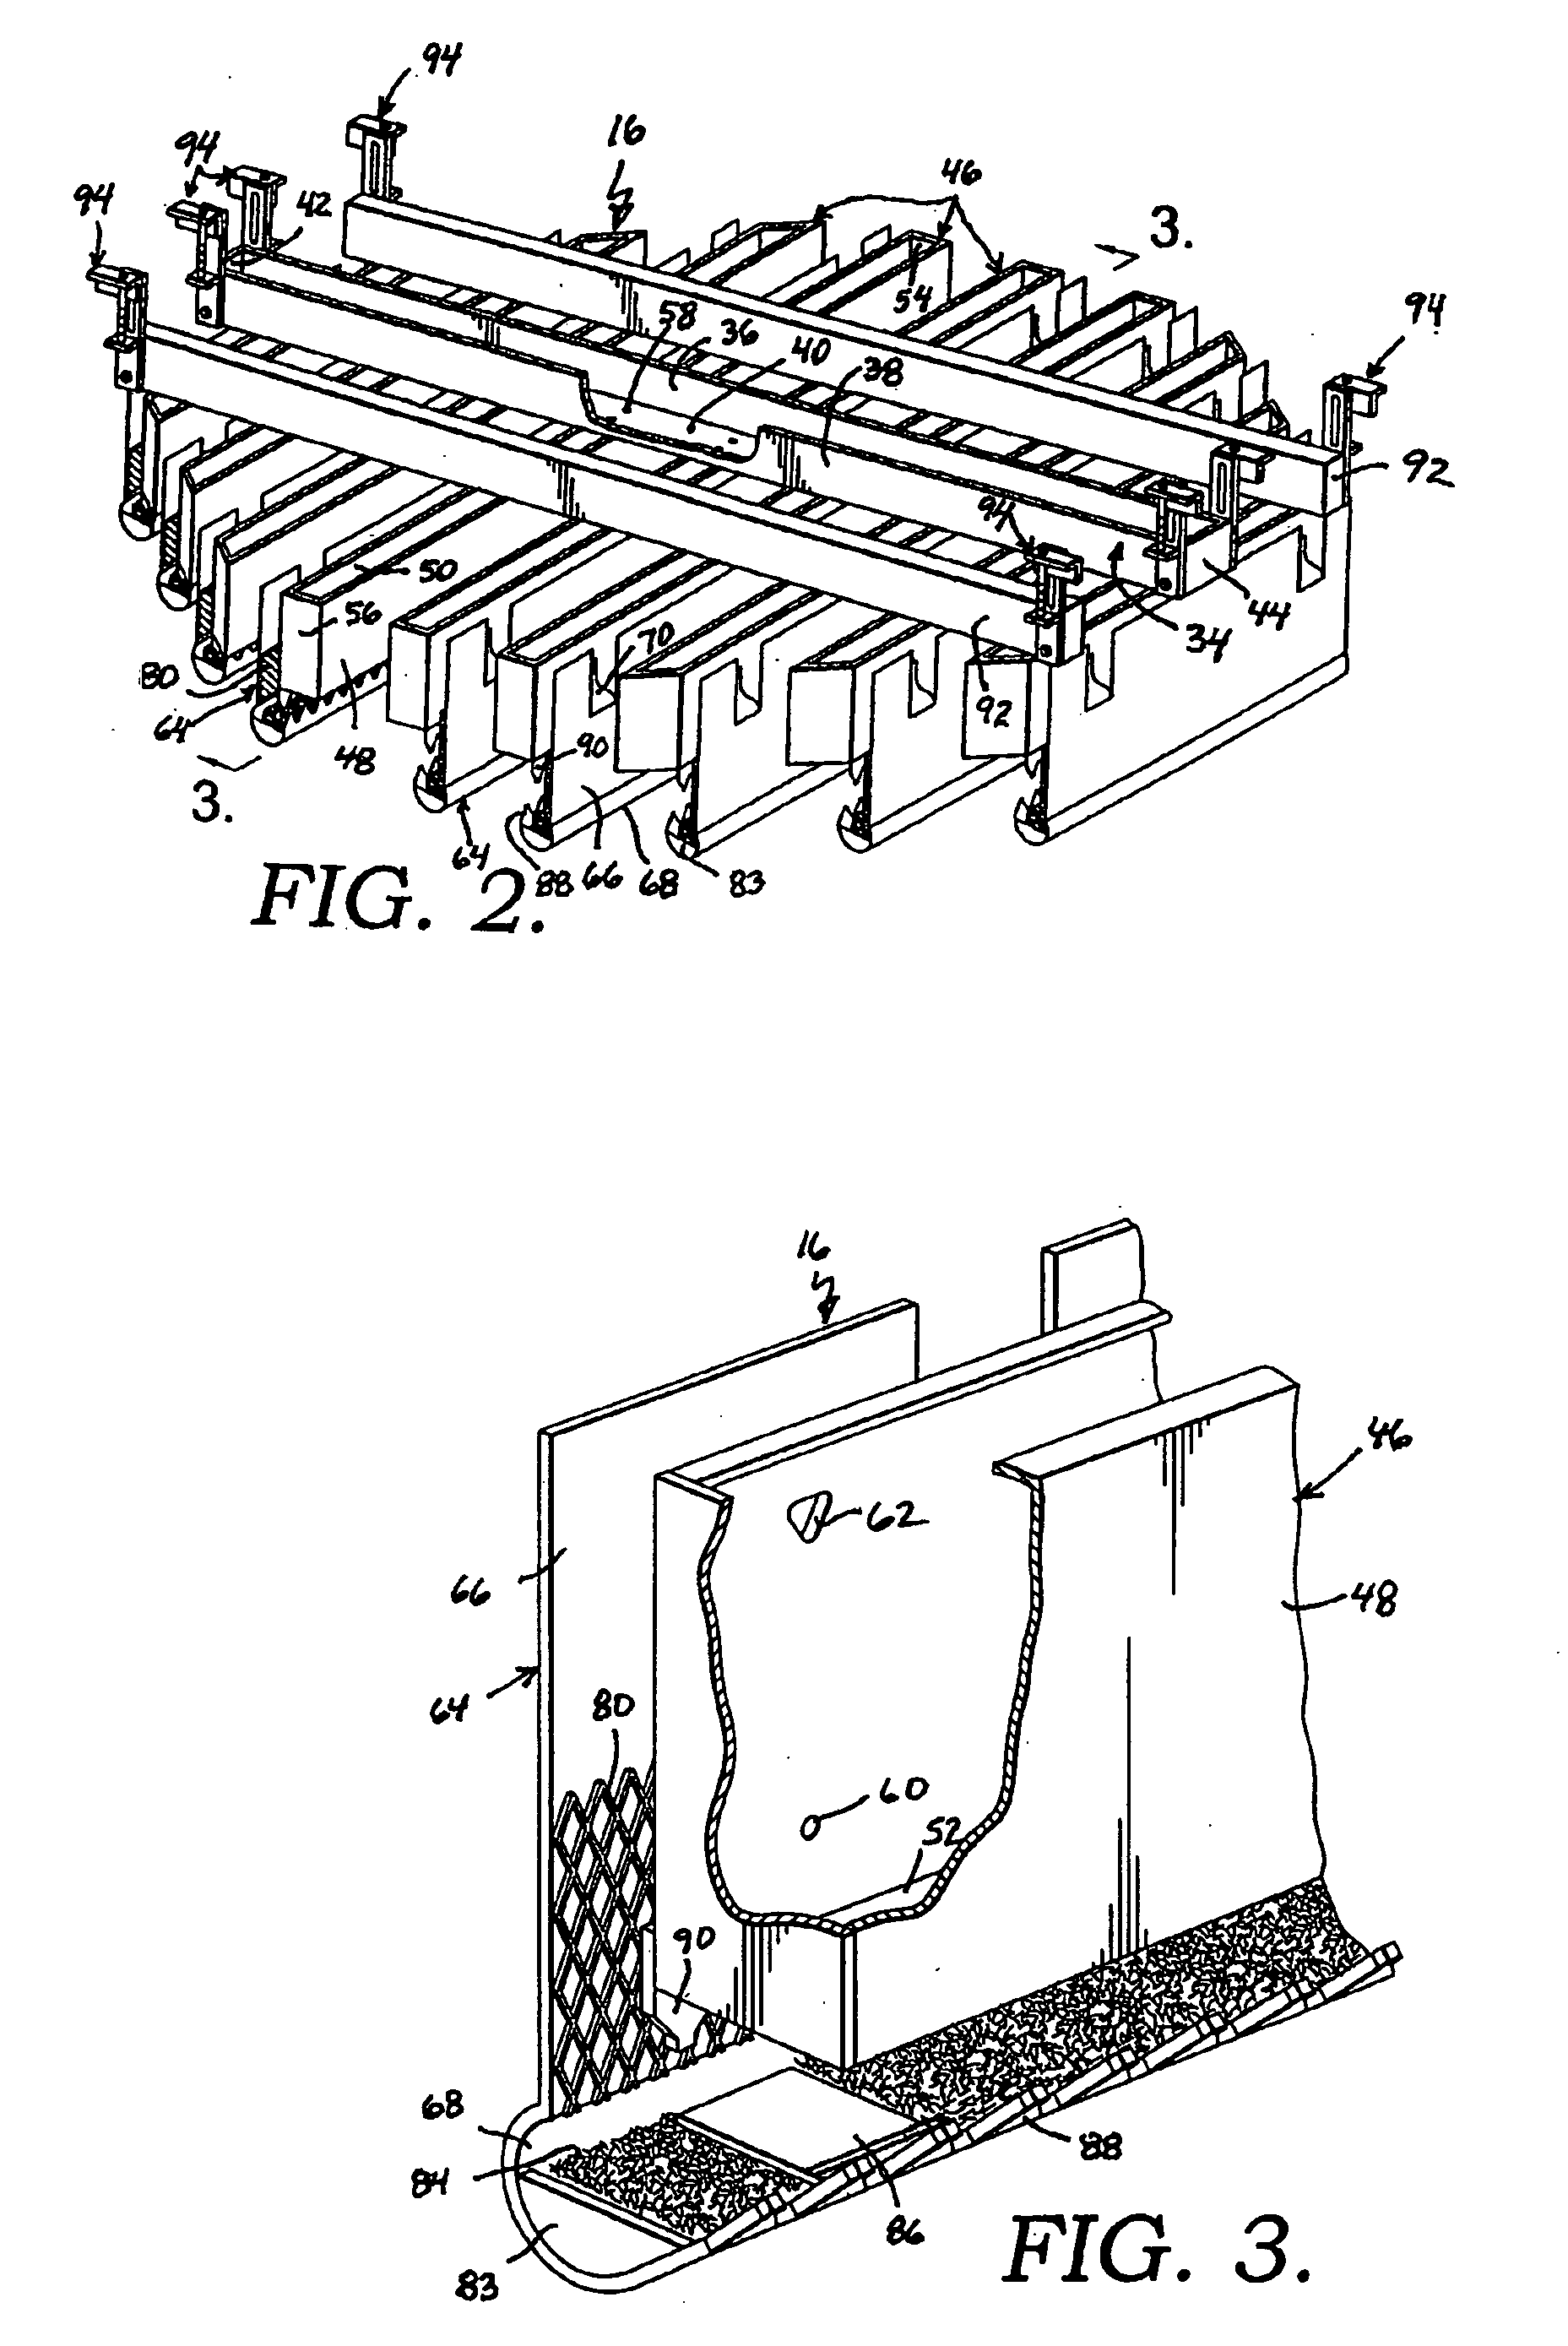 Liquid distributor for use in mass transfer column and method employing same